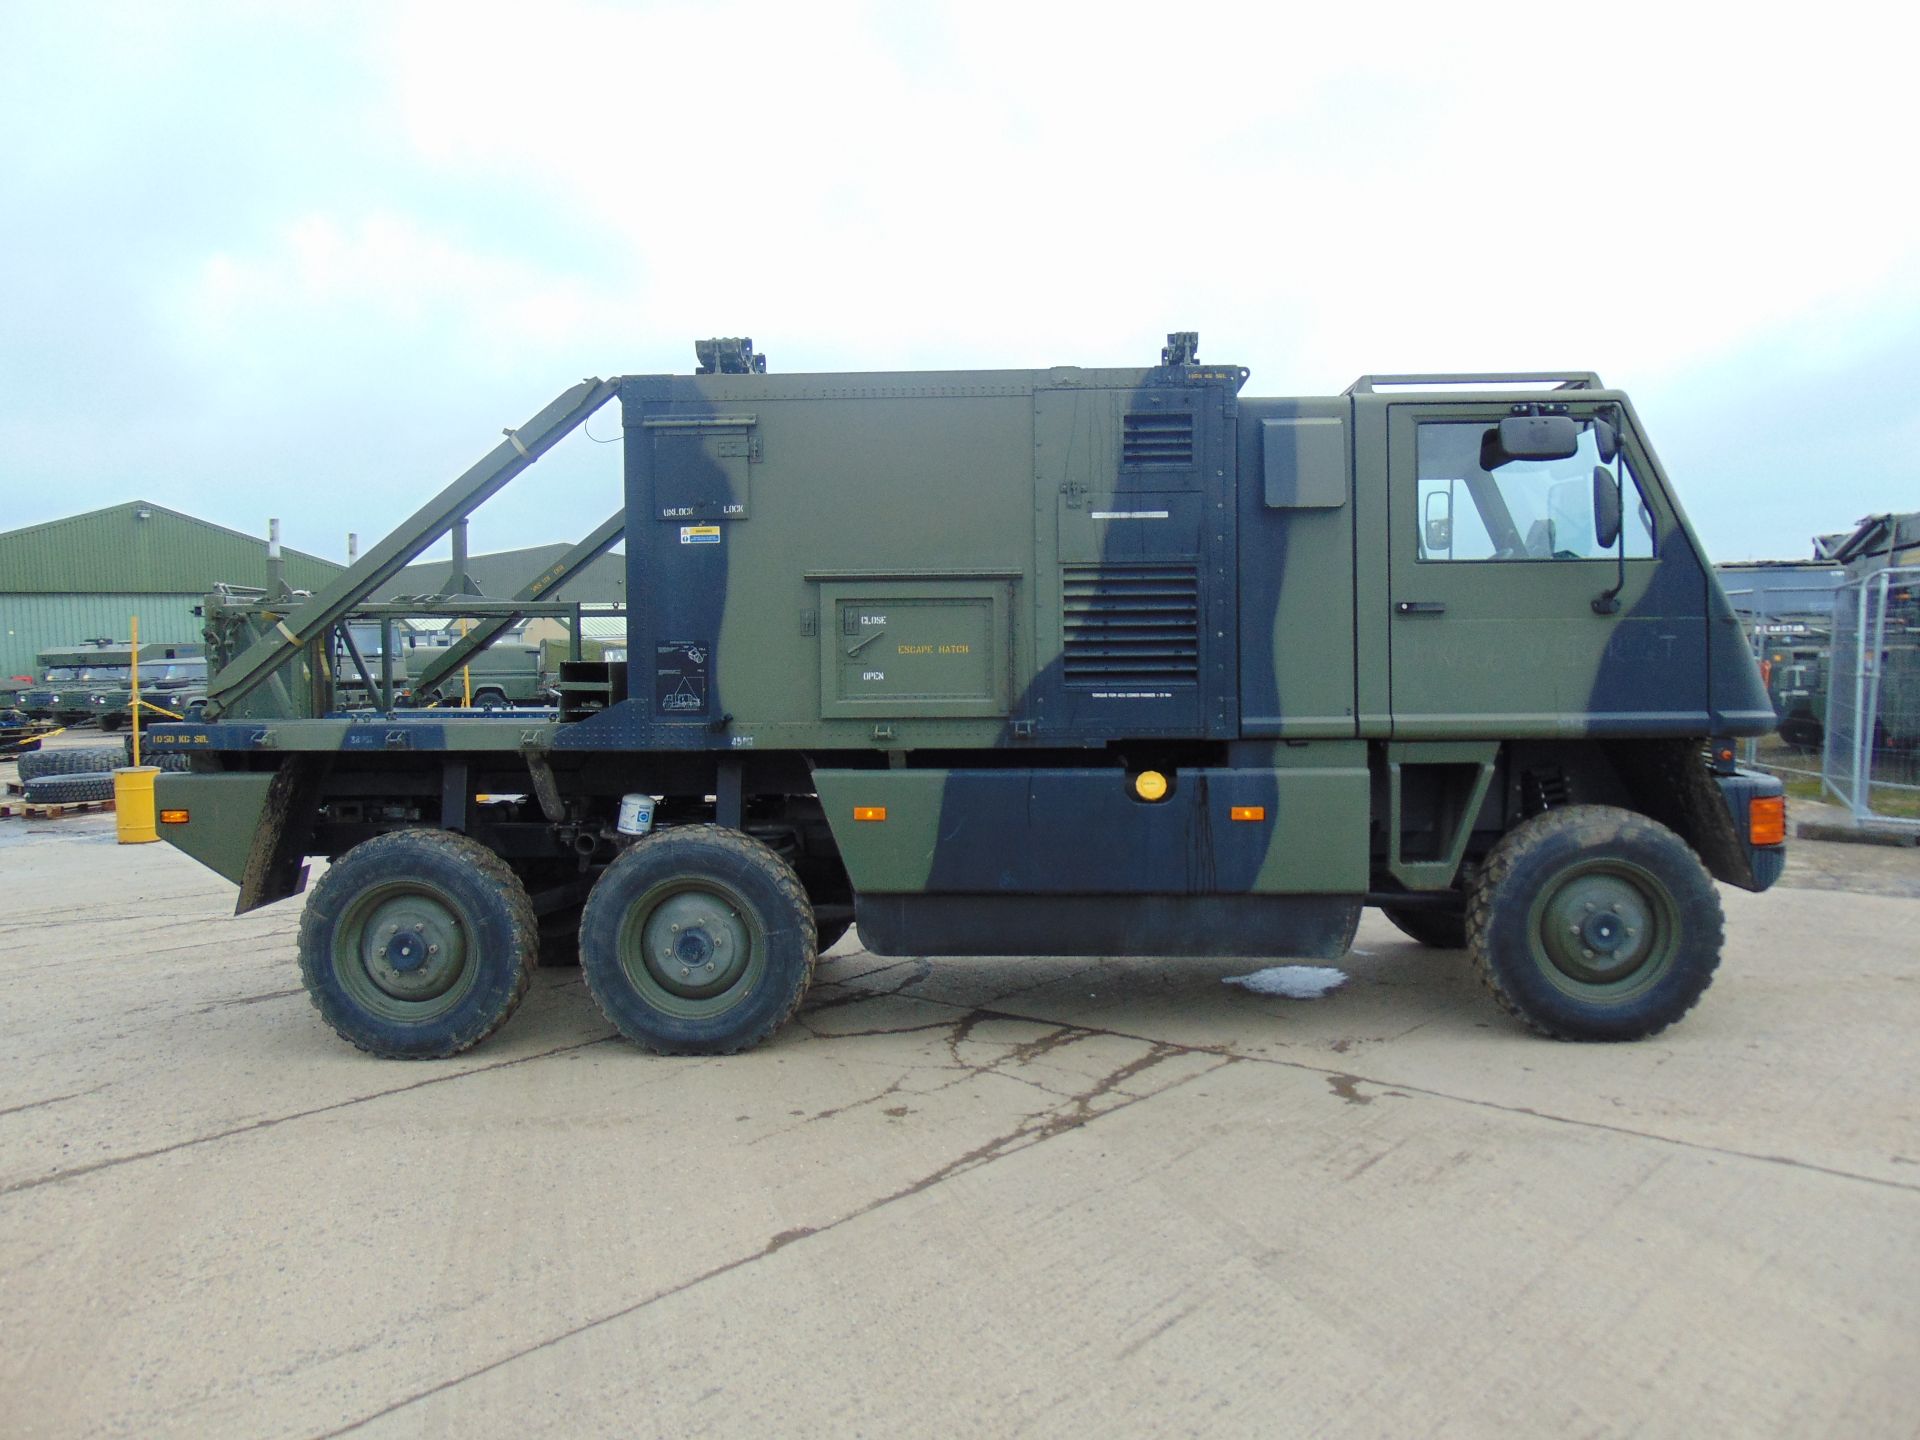 Ex Reserve Left Hand Drive Mowag Bucher Duro II 6x6 High-Mobility Tactical Vehicle - Image 15 of 15